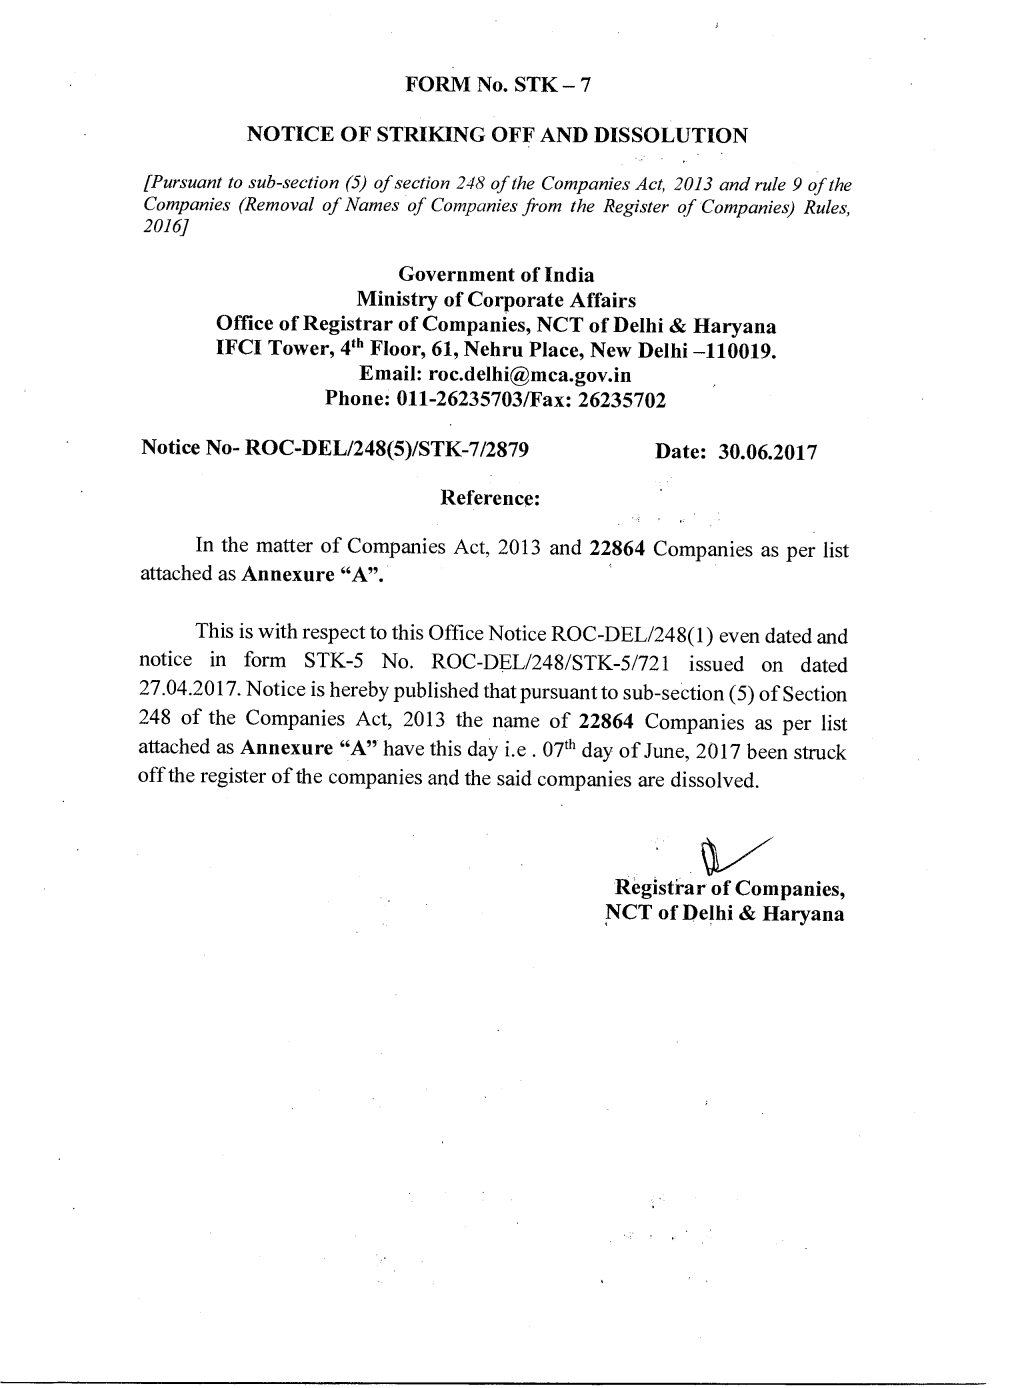 FORM No. STK — 7 NOTICE of STRIKING OFF and DISSOLUTION Government of India Ministry of Corporate Affairs Office of Registrar